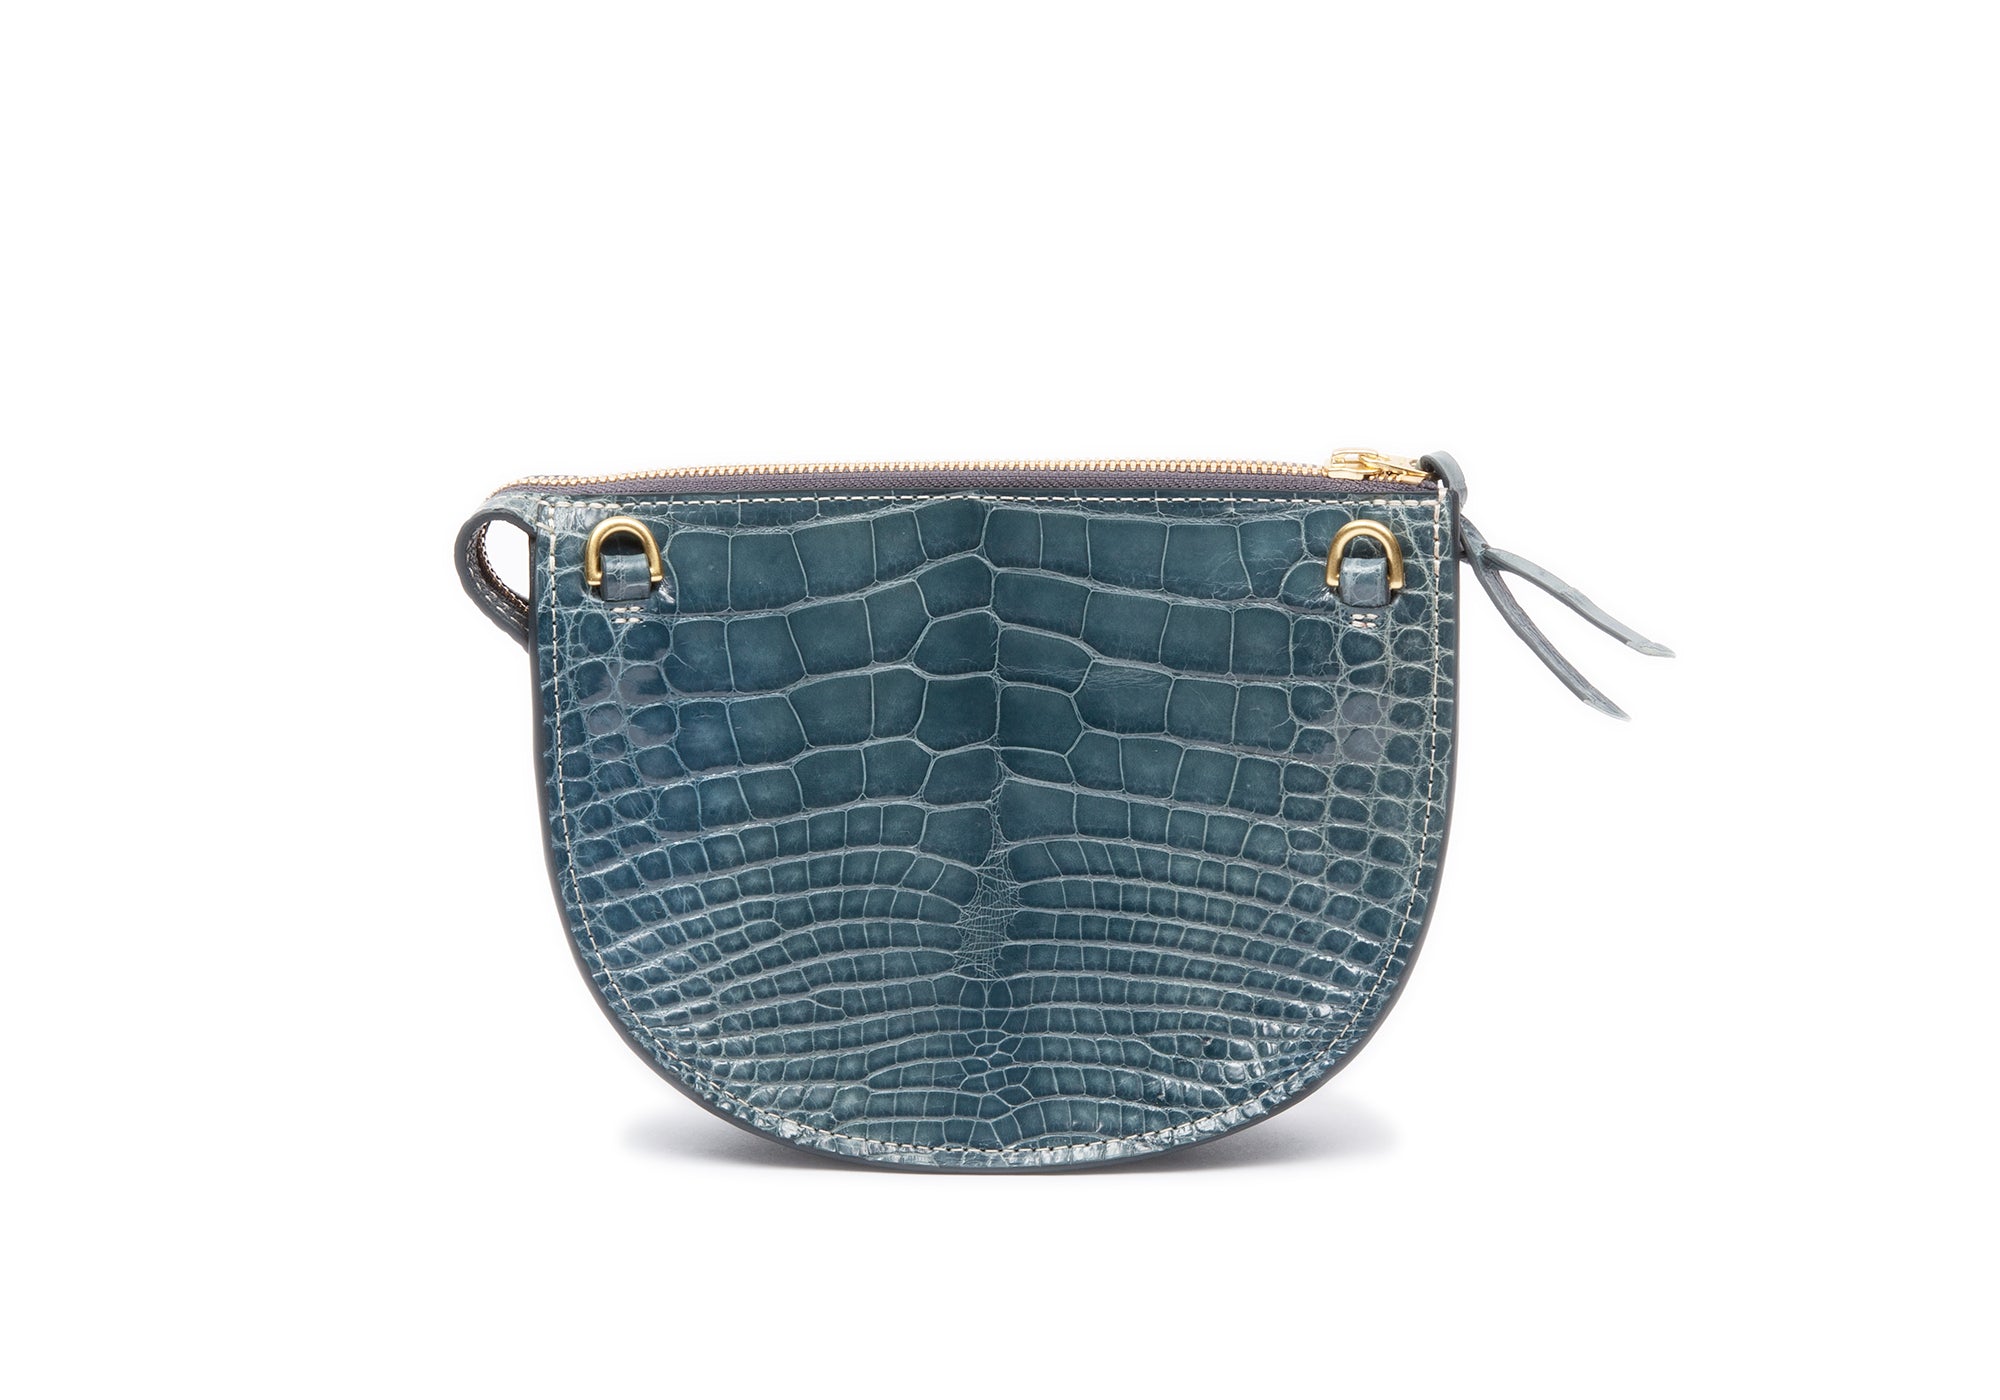 Genuine Crocodile bag - an excellent gift for fashion lovers